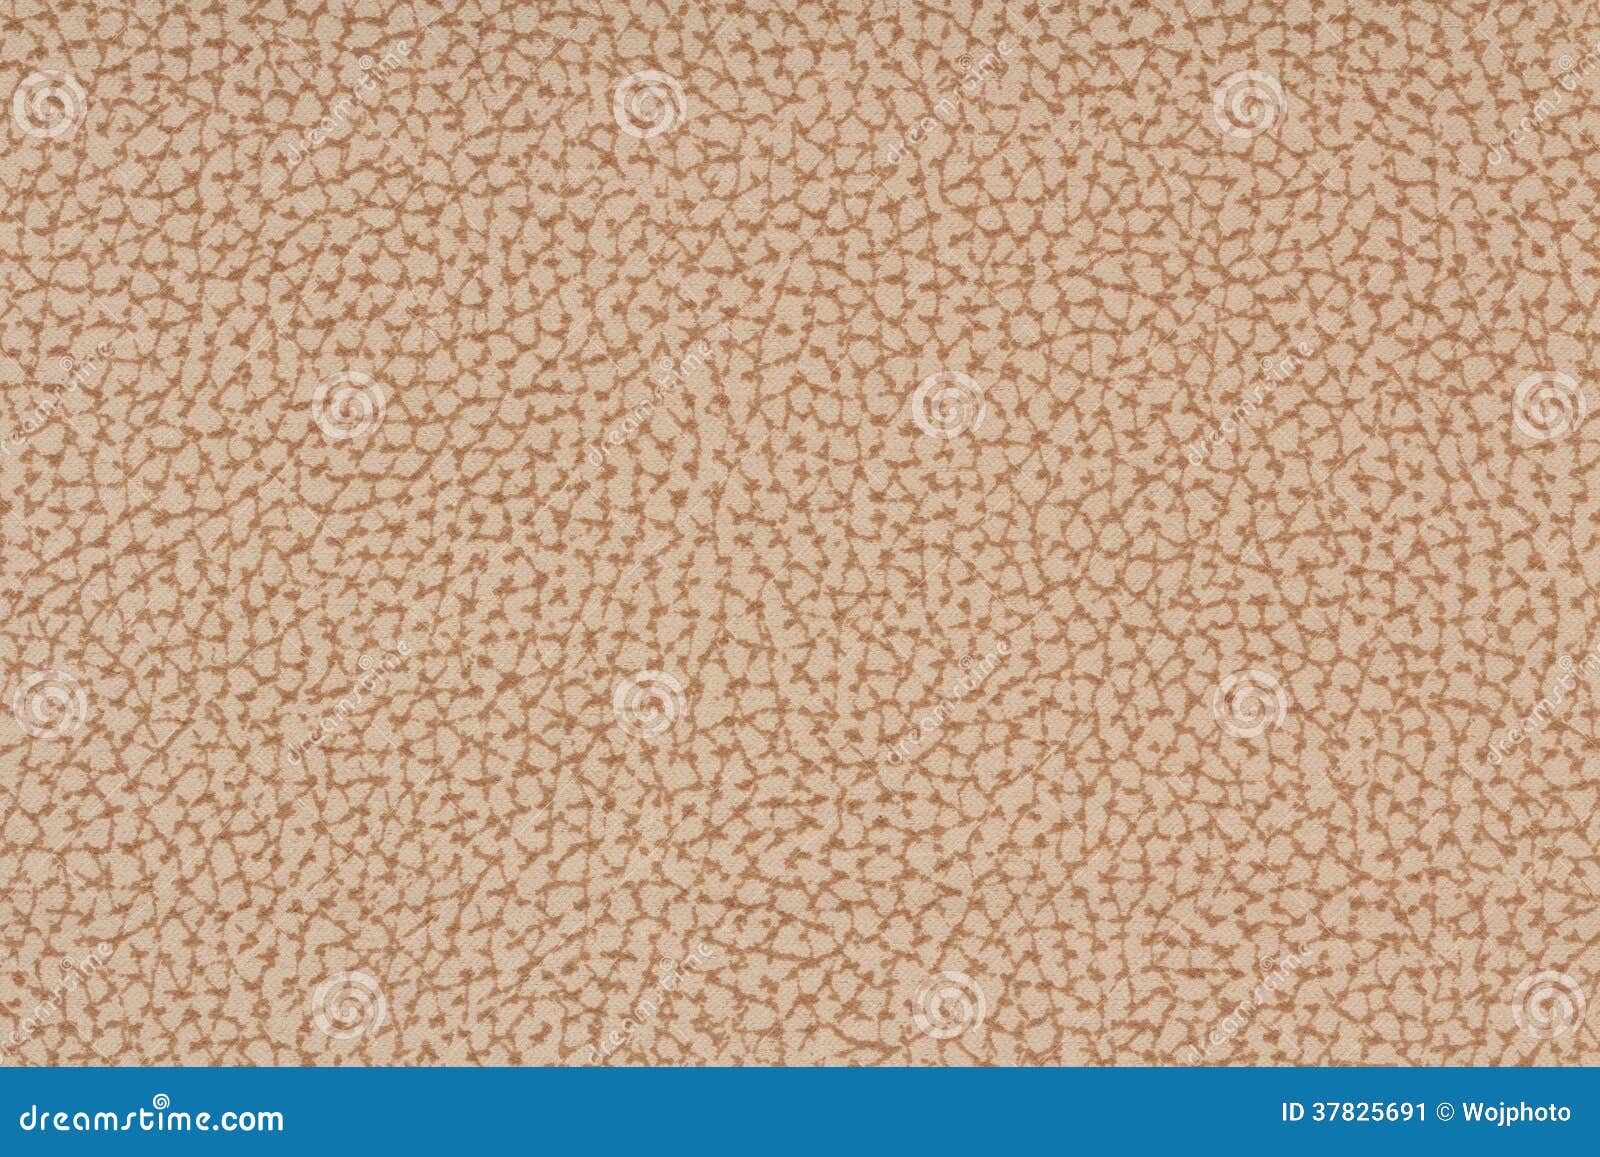 abstract highly detailed fabric background